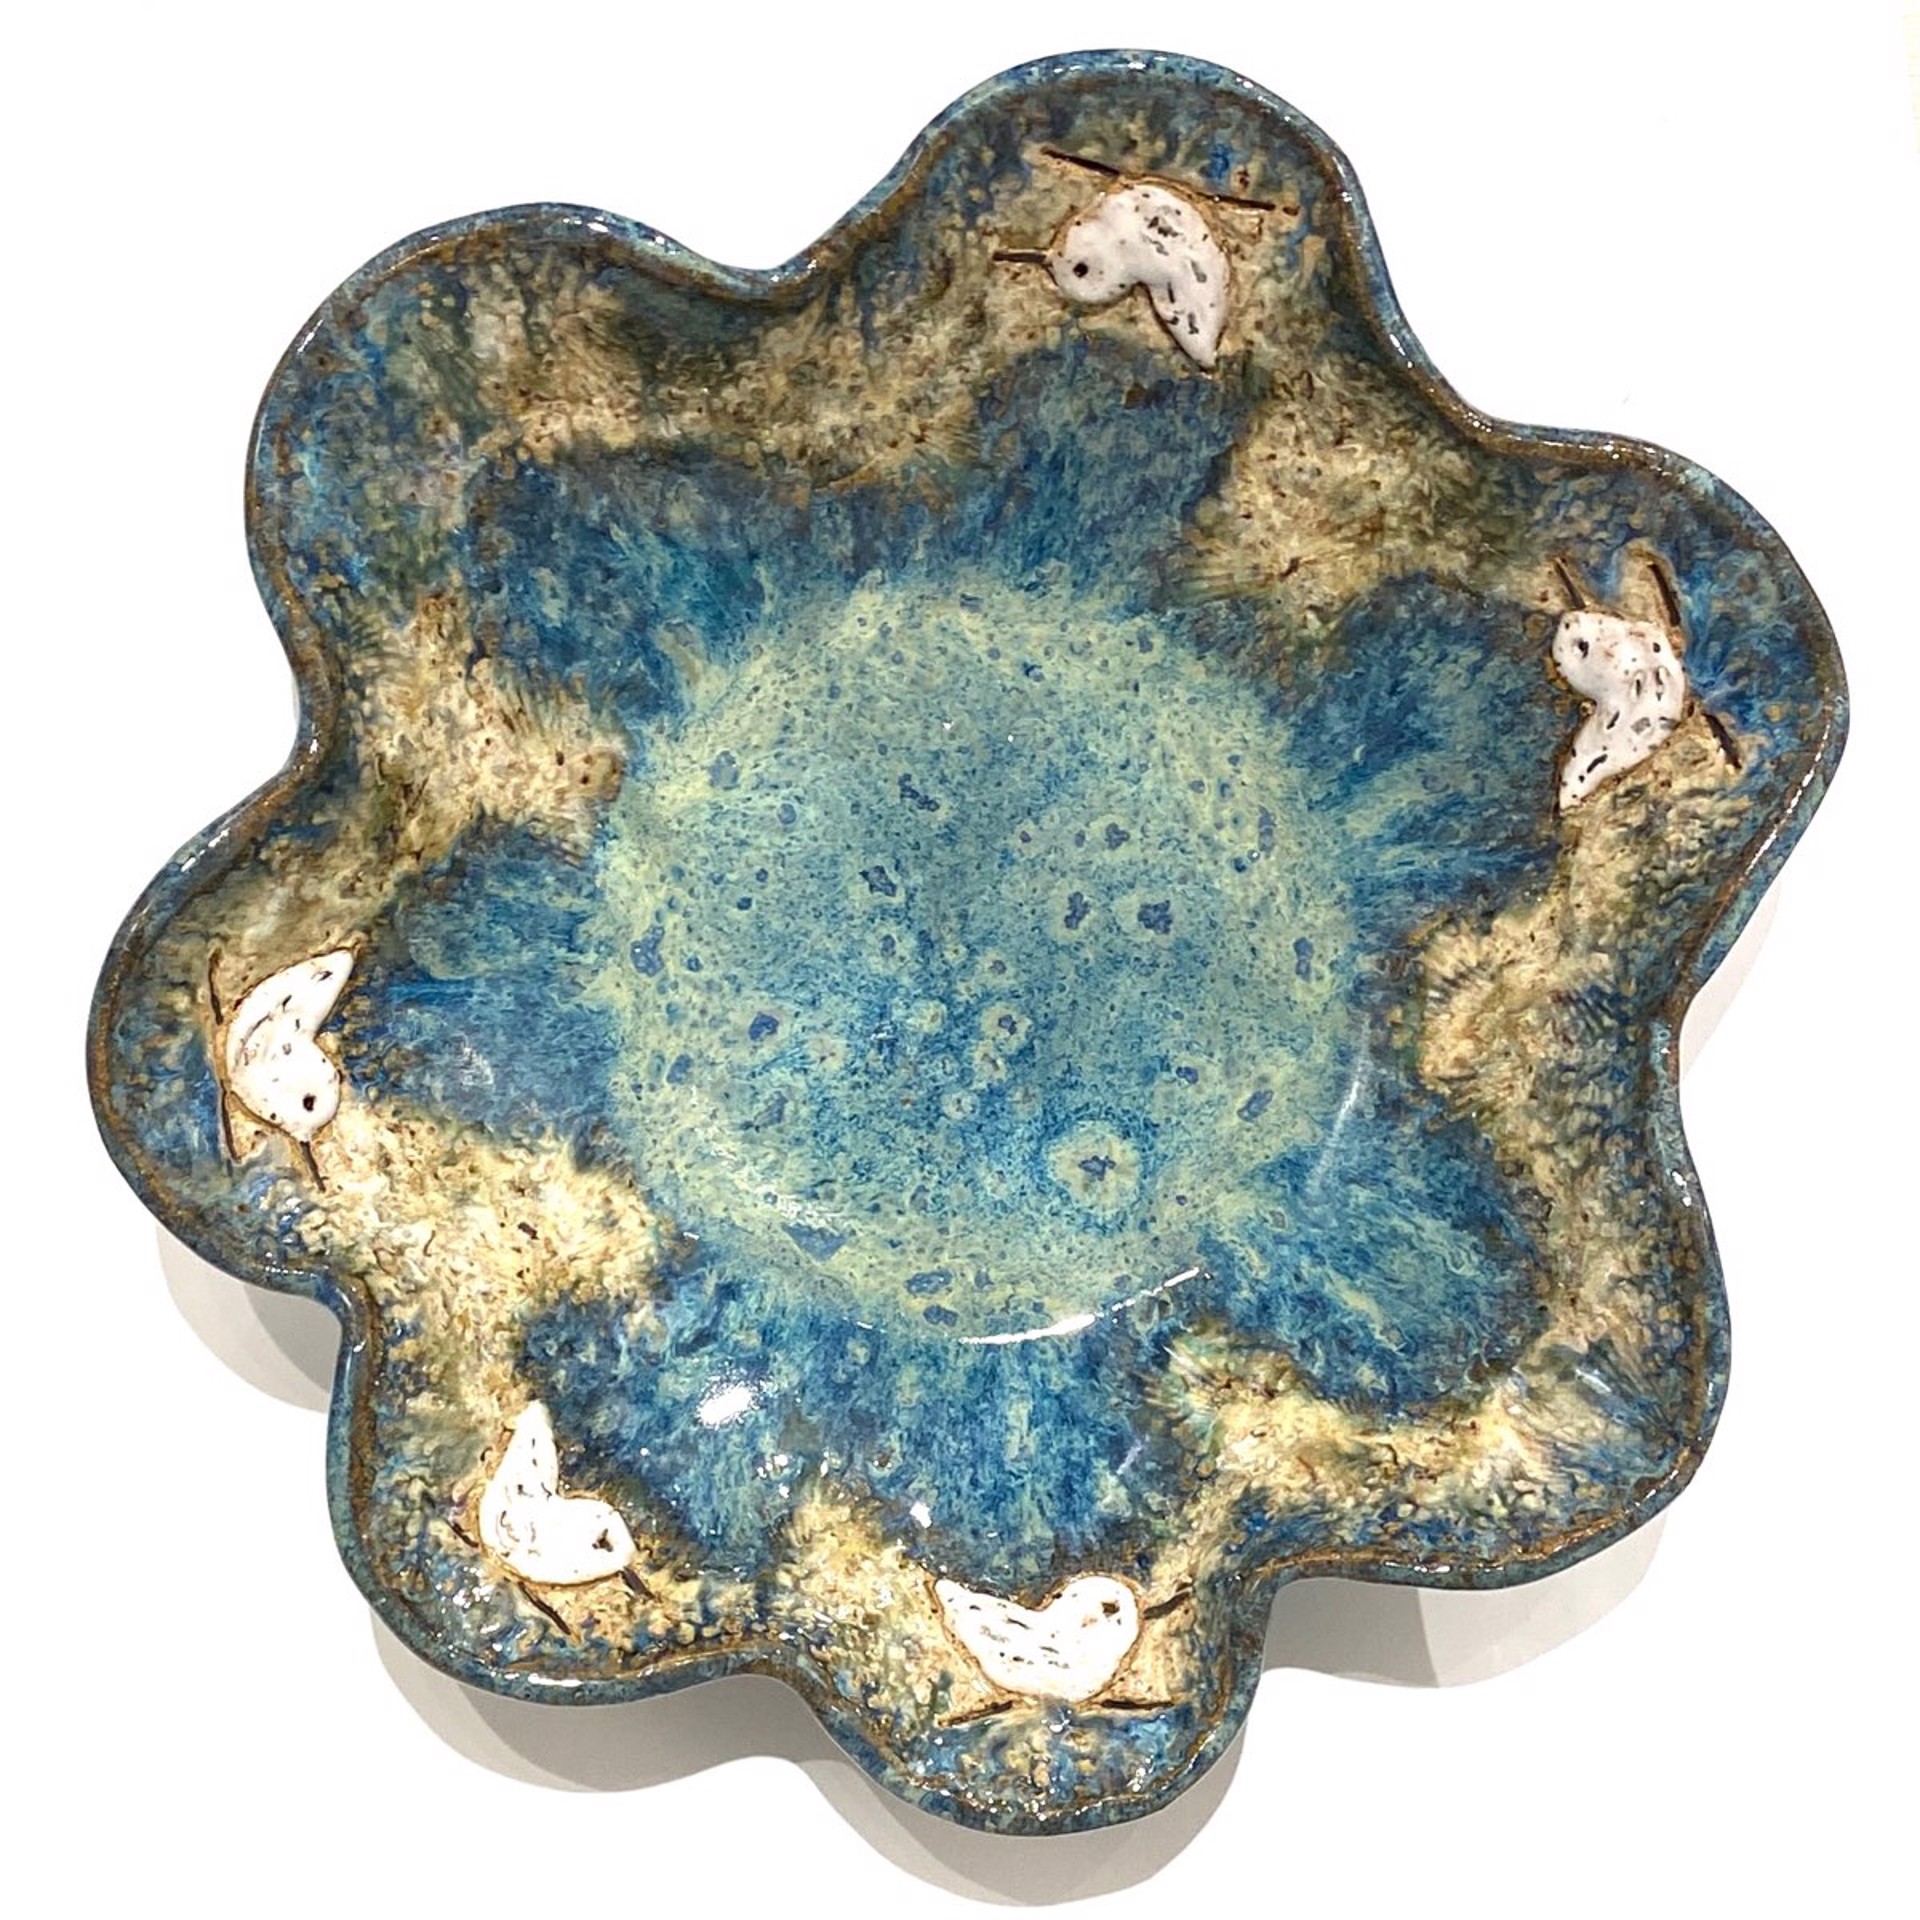 LG23-960 Large Round Scalloped Bowl with Five Sandpipers (Blue Glaze) by Jim & Steffi Logan